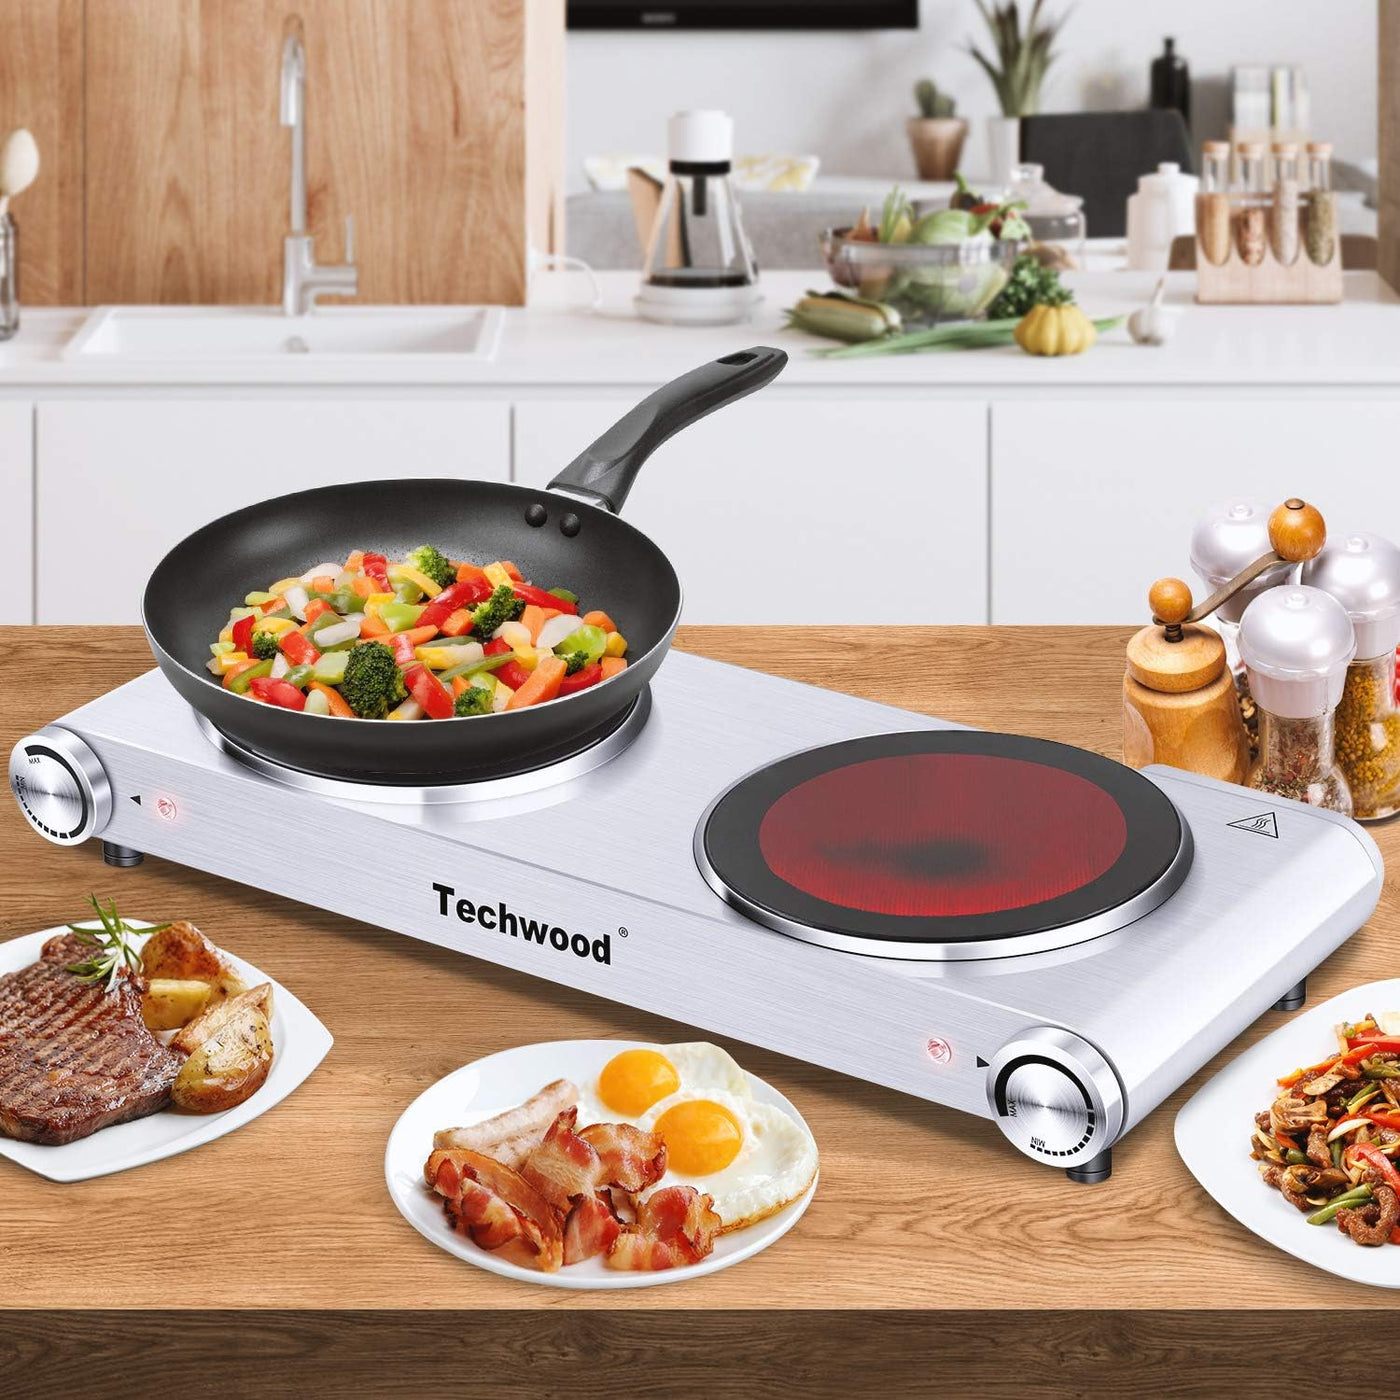 Techwood 1500W Hot Plate Electric Stove Single Burner Countertop Infrared Ceramic Cooktop, Portable Ceramic Glass & Stainless Steel